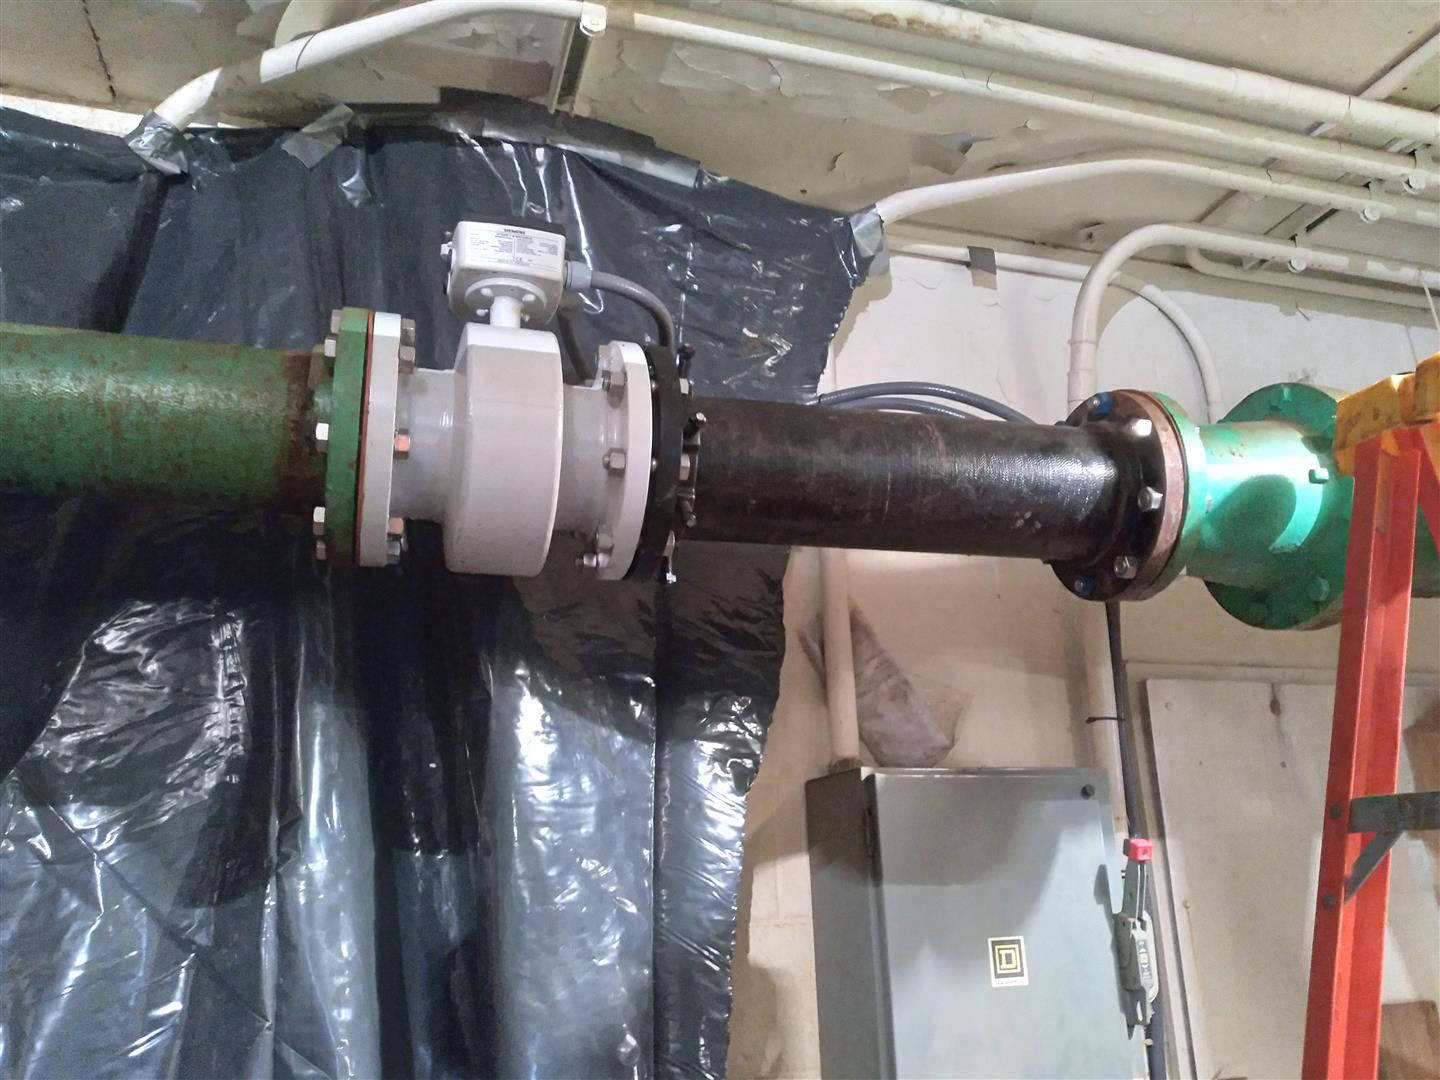 North Sioux City SD - Replaced an old impeller flowmeter with 6" Siemens Sitrans F M Mag5000 flowmeter.